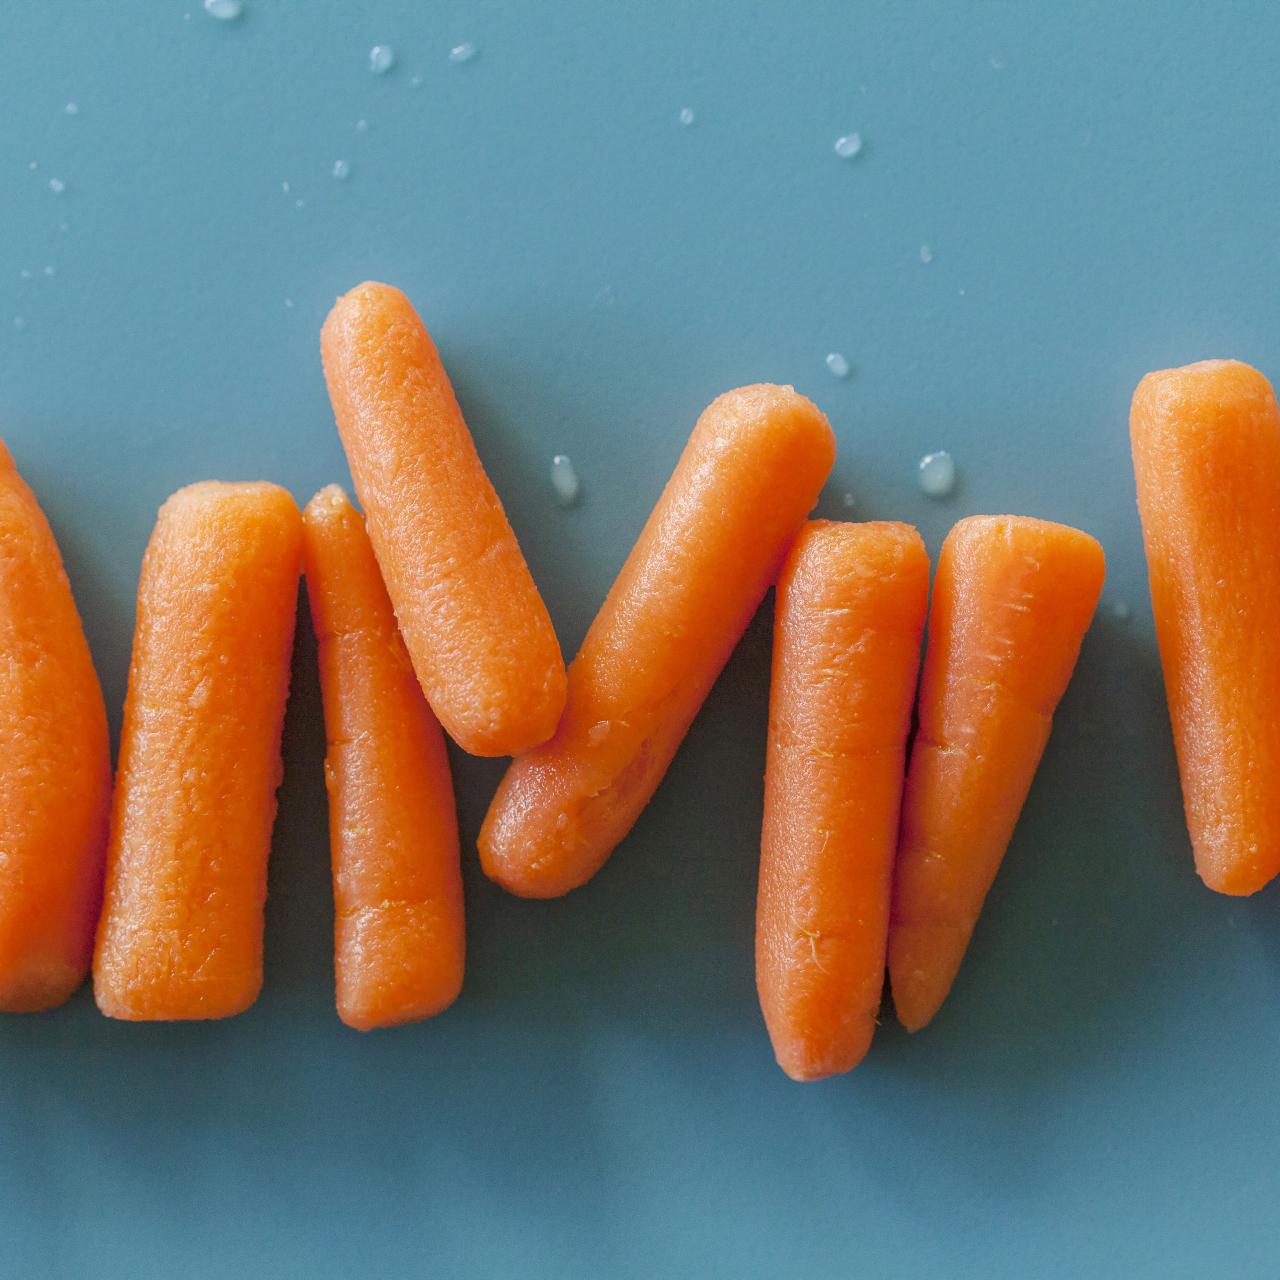 How do shred baby carrots with out shredding your fingers